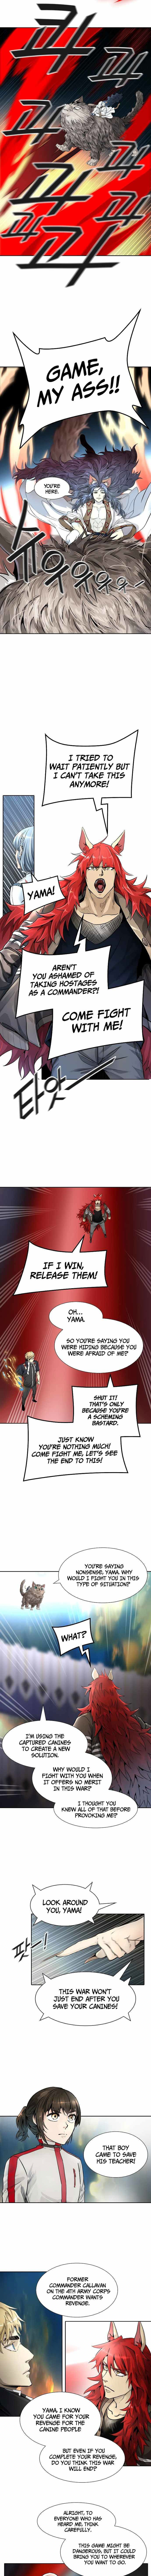 Tower of God Chapter 486 - Season 4 Begin page 6